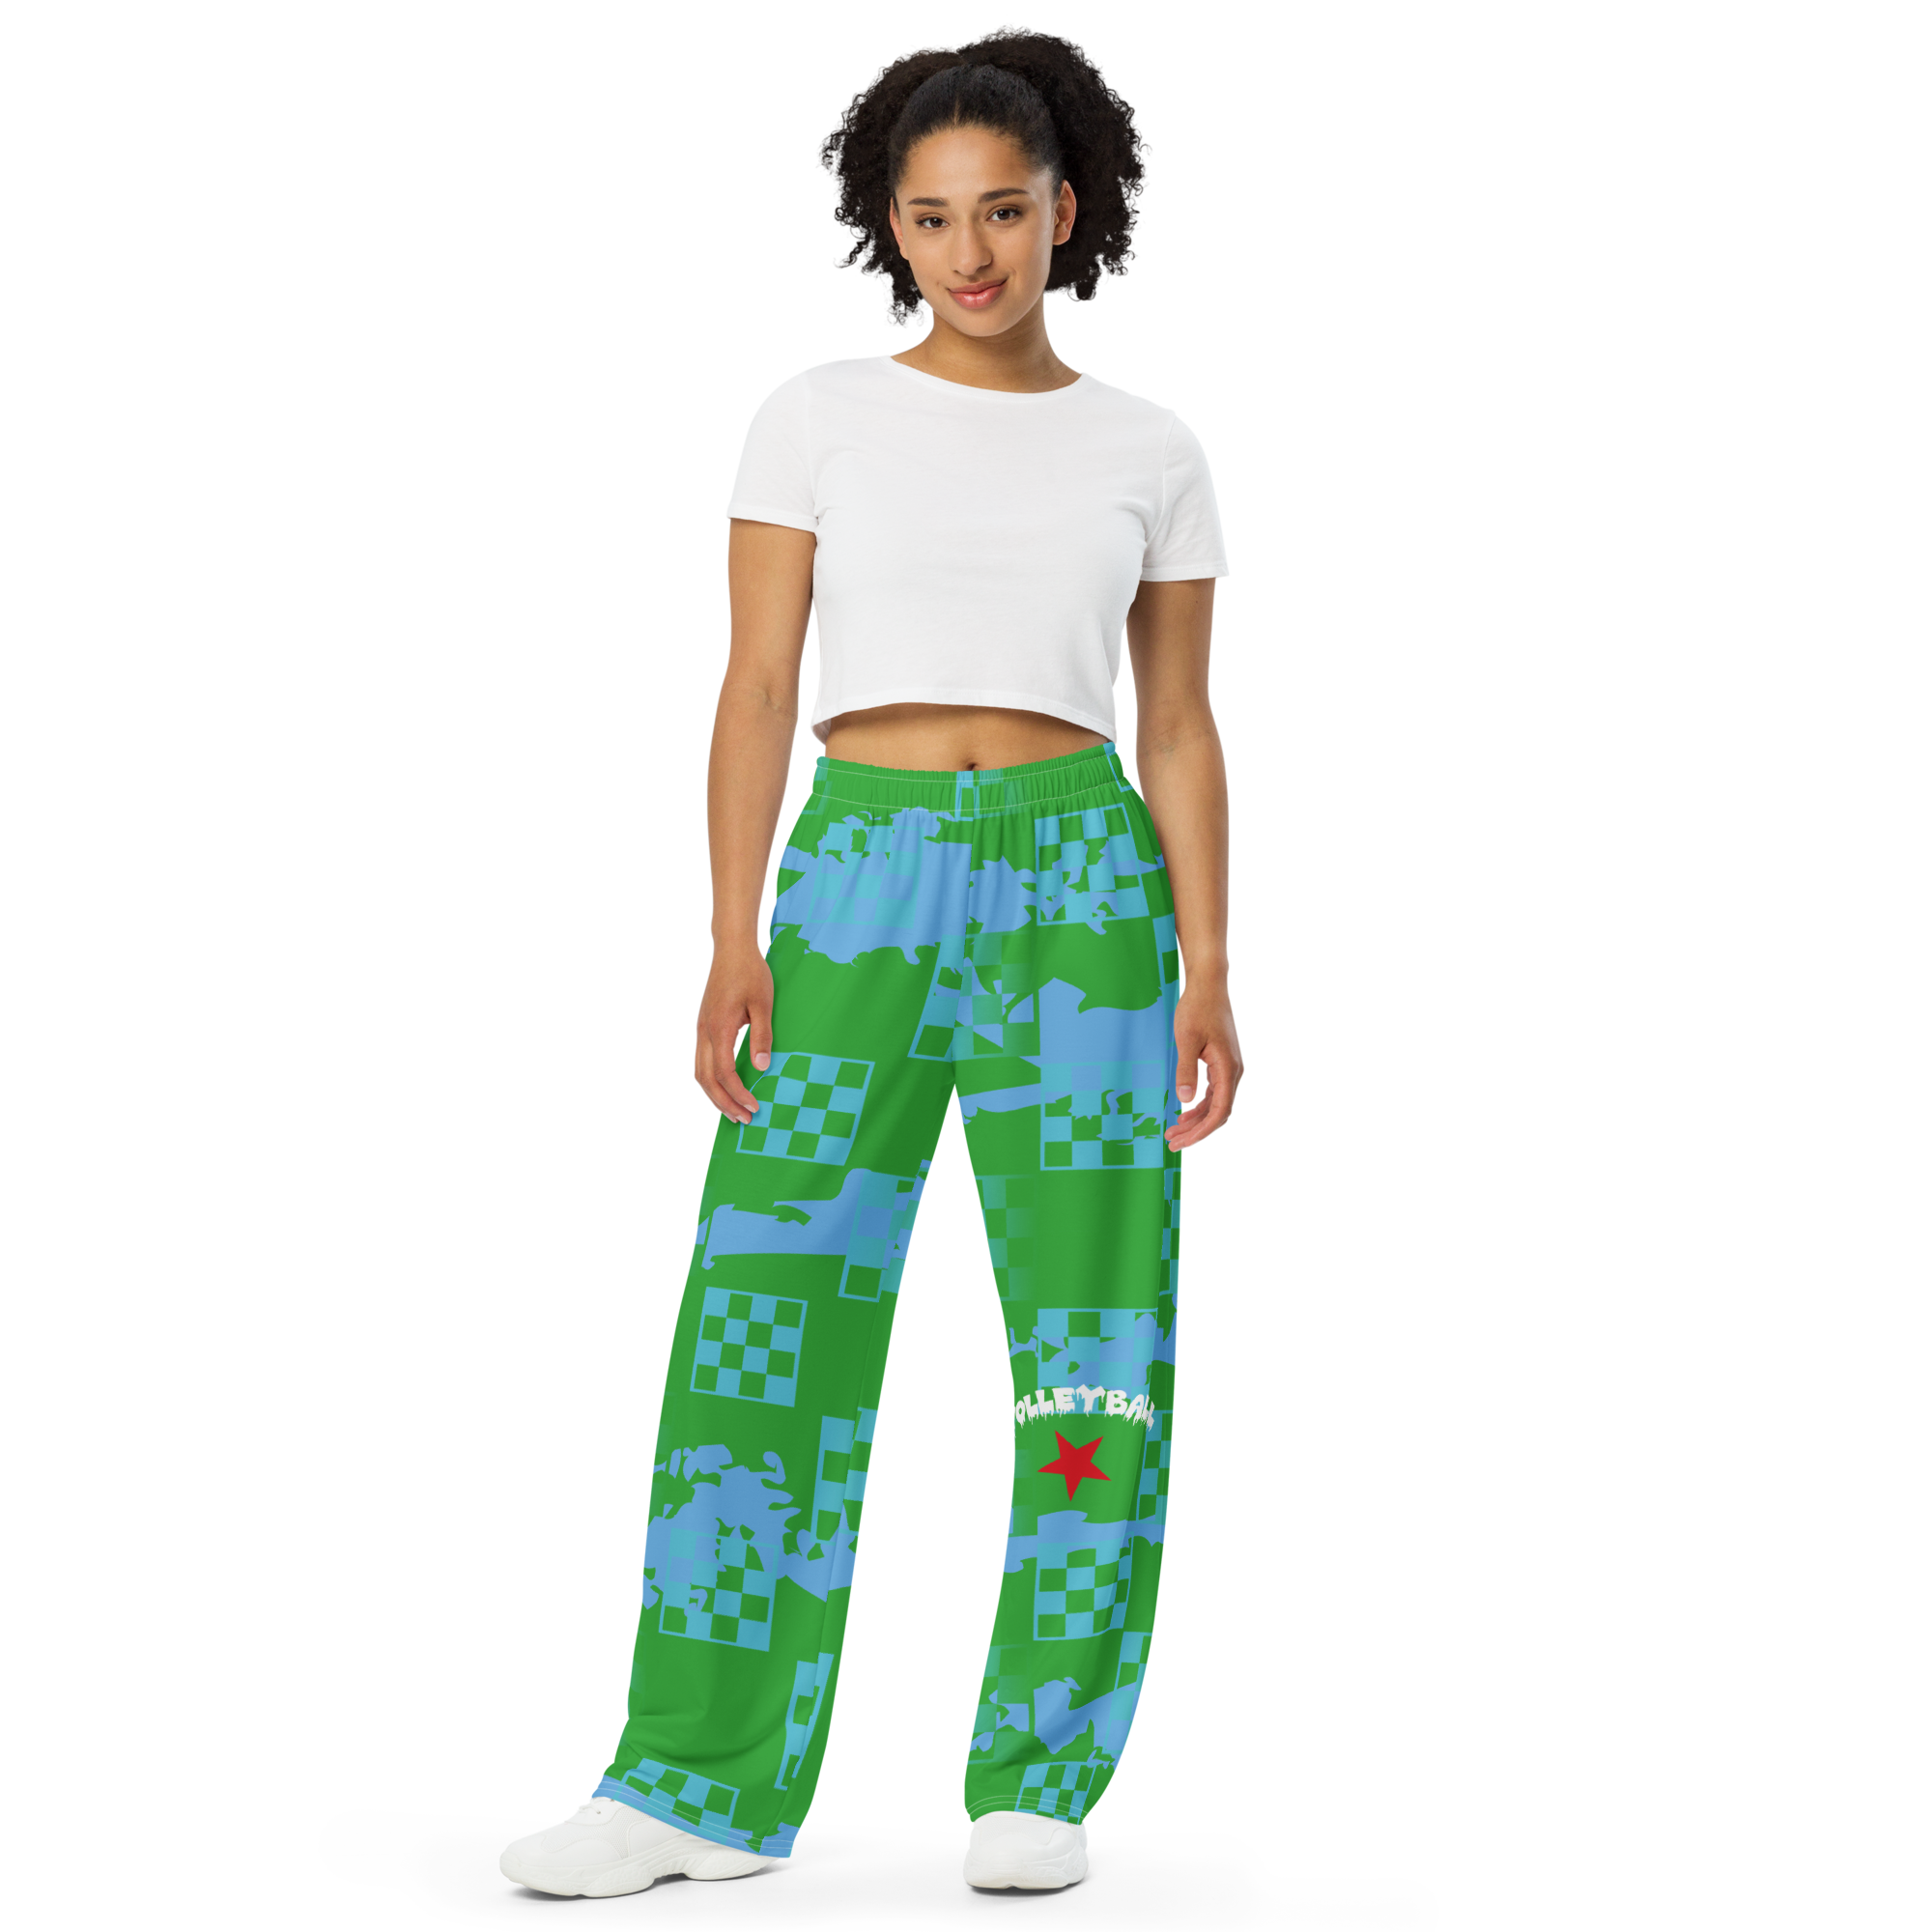 My wide leg pajama pants are more flattering, way more colorful and super comfy pj pants with deep pockets, a long drawstring and they run true to size.